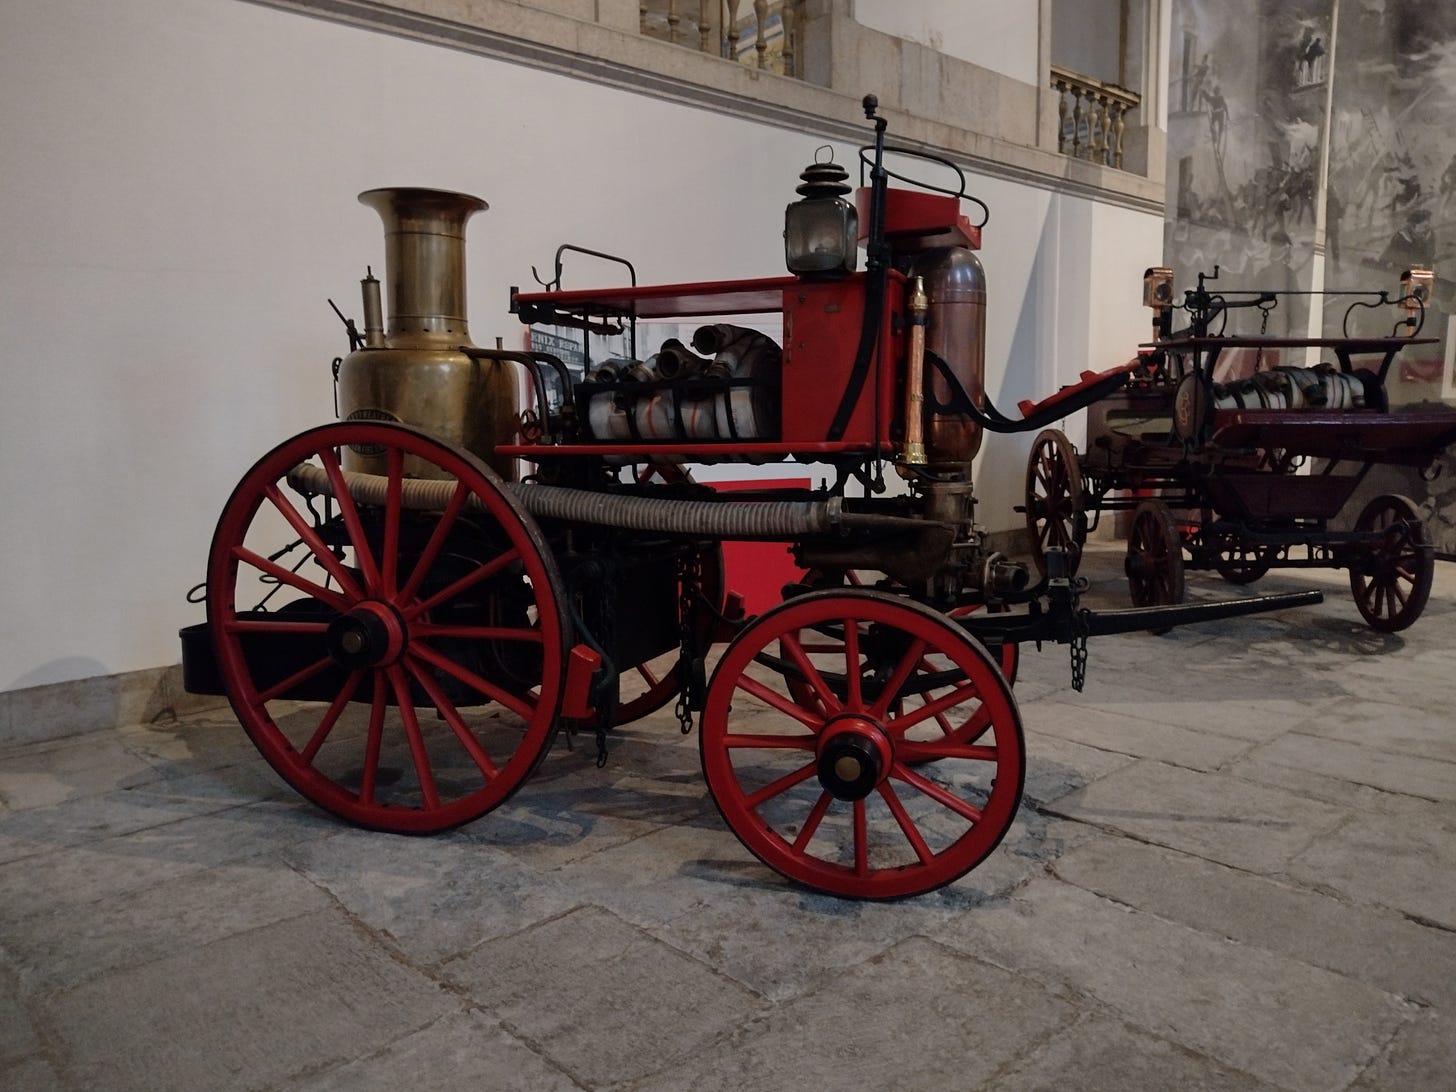 Old firefighter horse-drawn carriage.